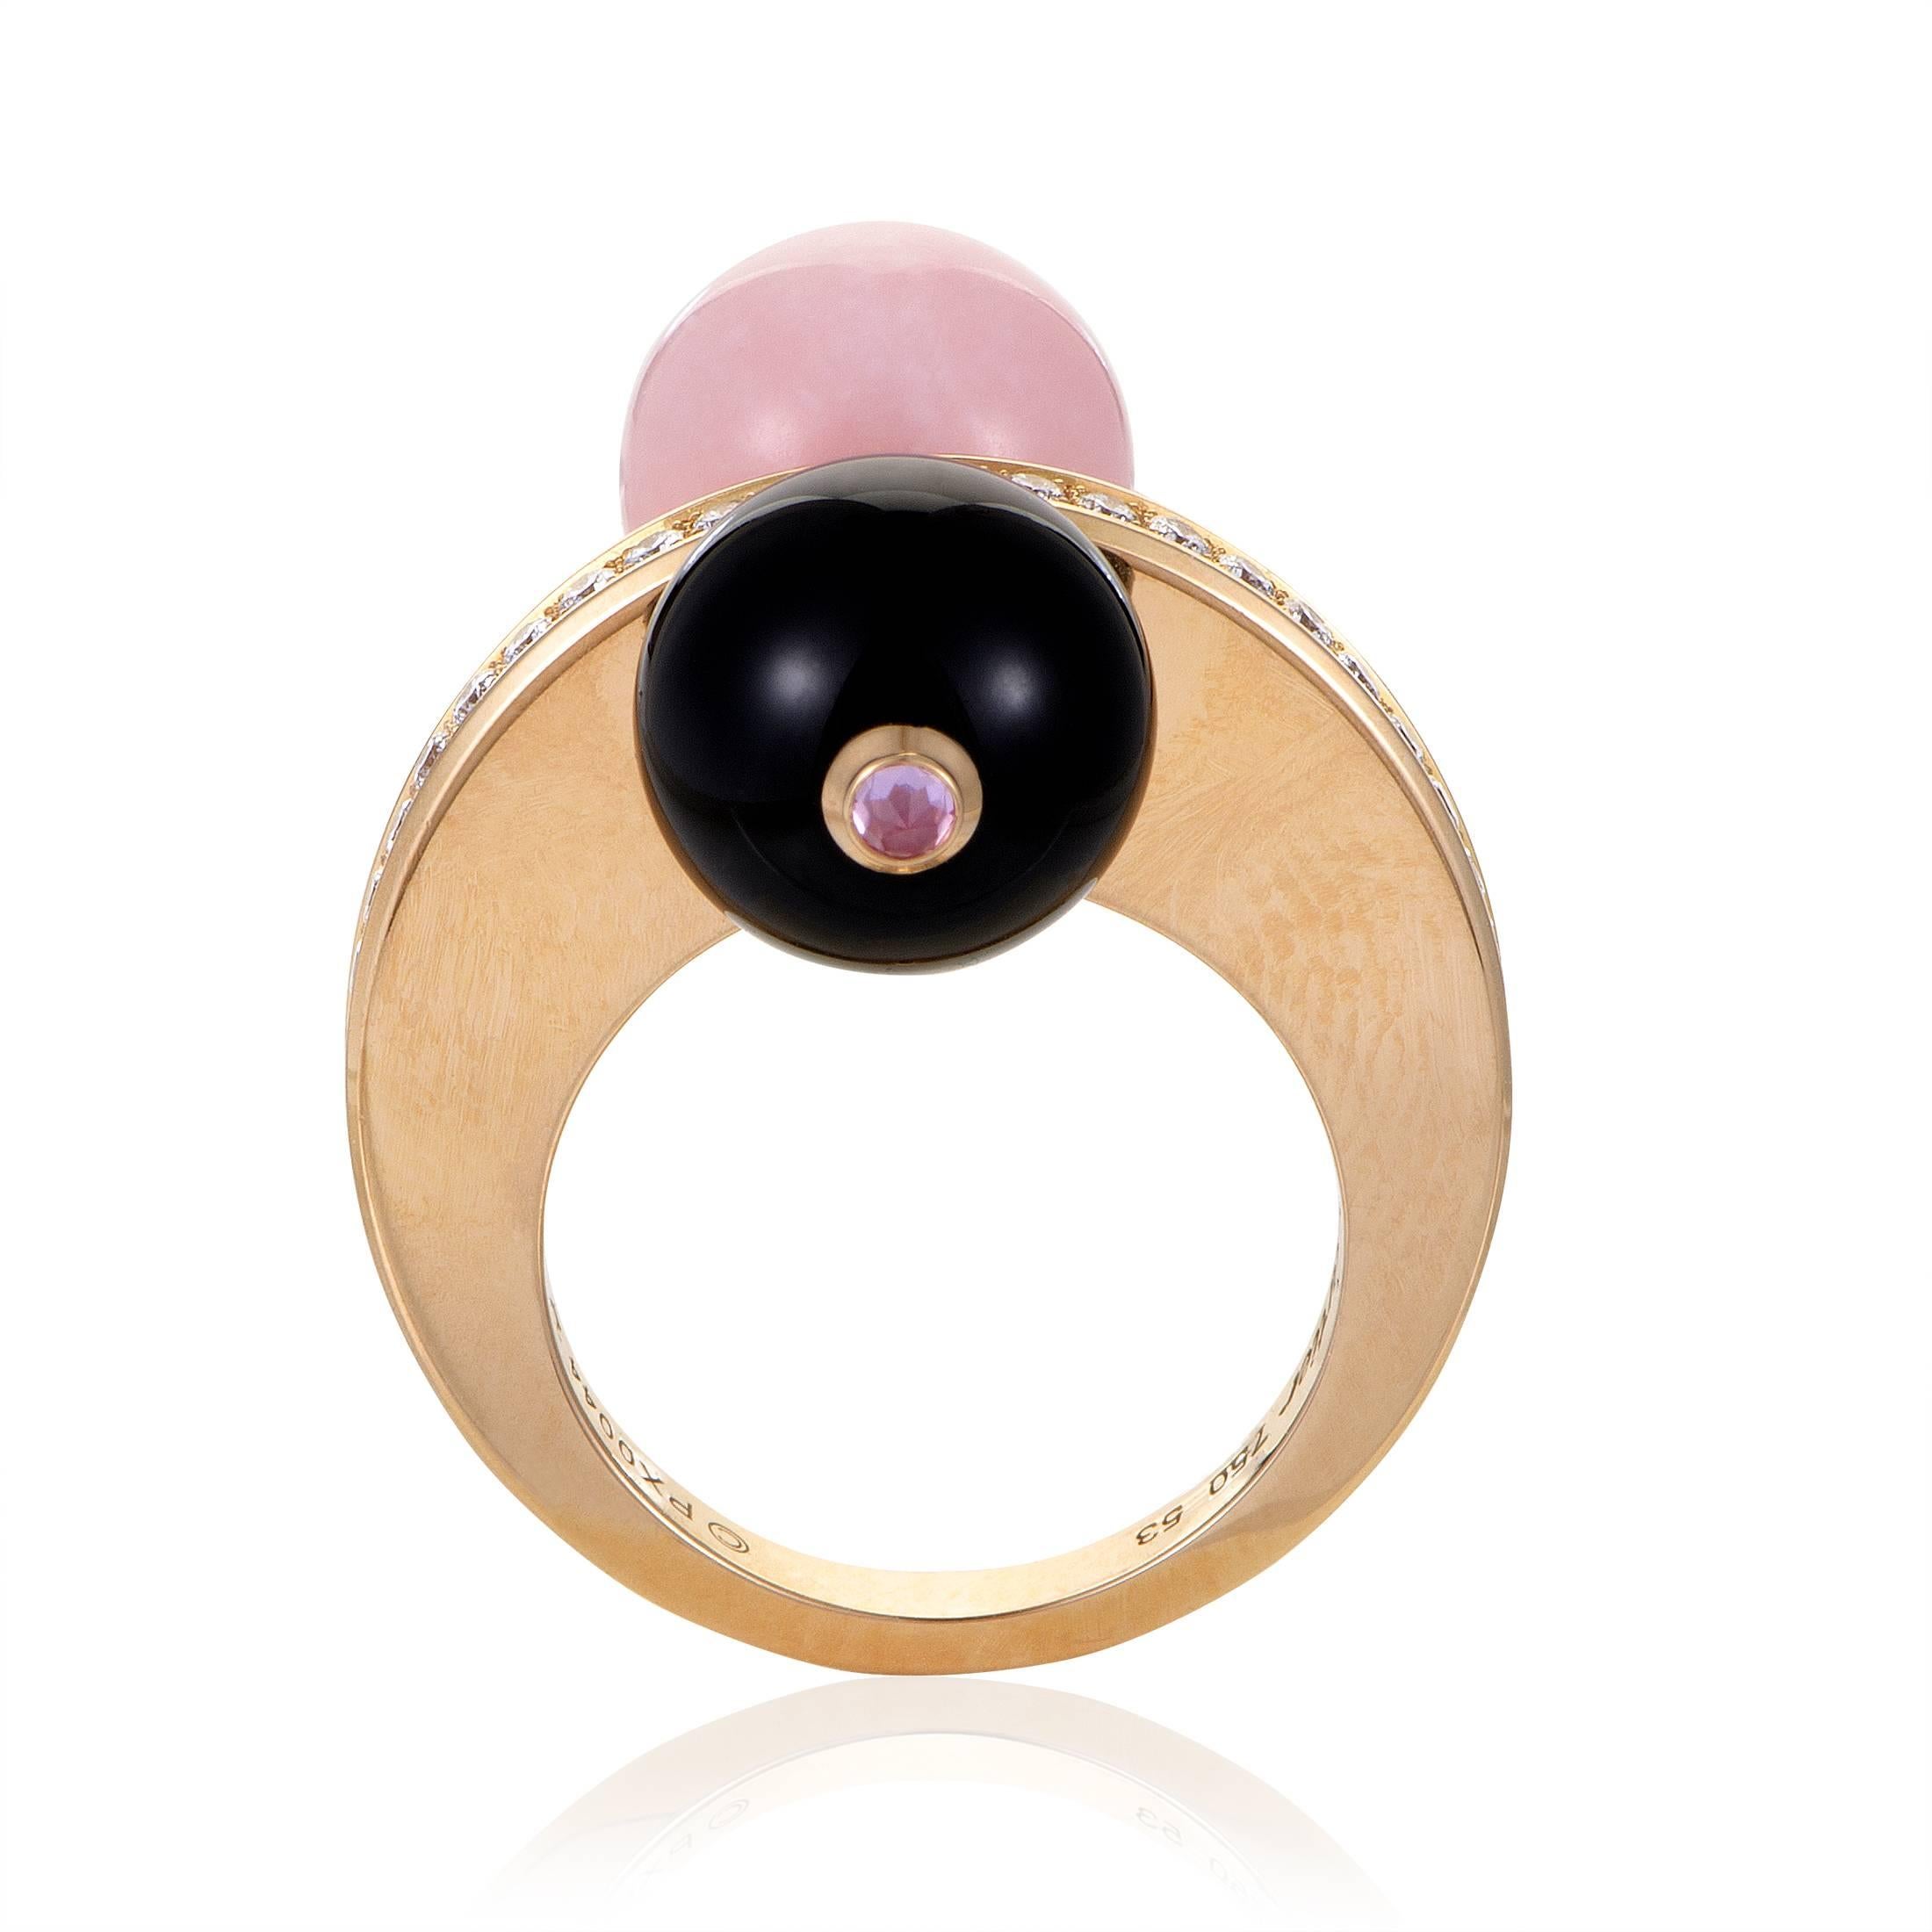 With strikingly contrasting tones of stunning onyx and delightful pink quartz producing an eye-catching effect, this fabulous 18K rose gold ring from Cartier also boasts scintillating diamonds weighing in total approximately 0.50ct.
Ring Size: